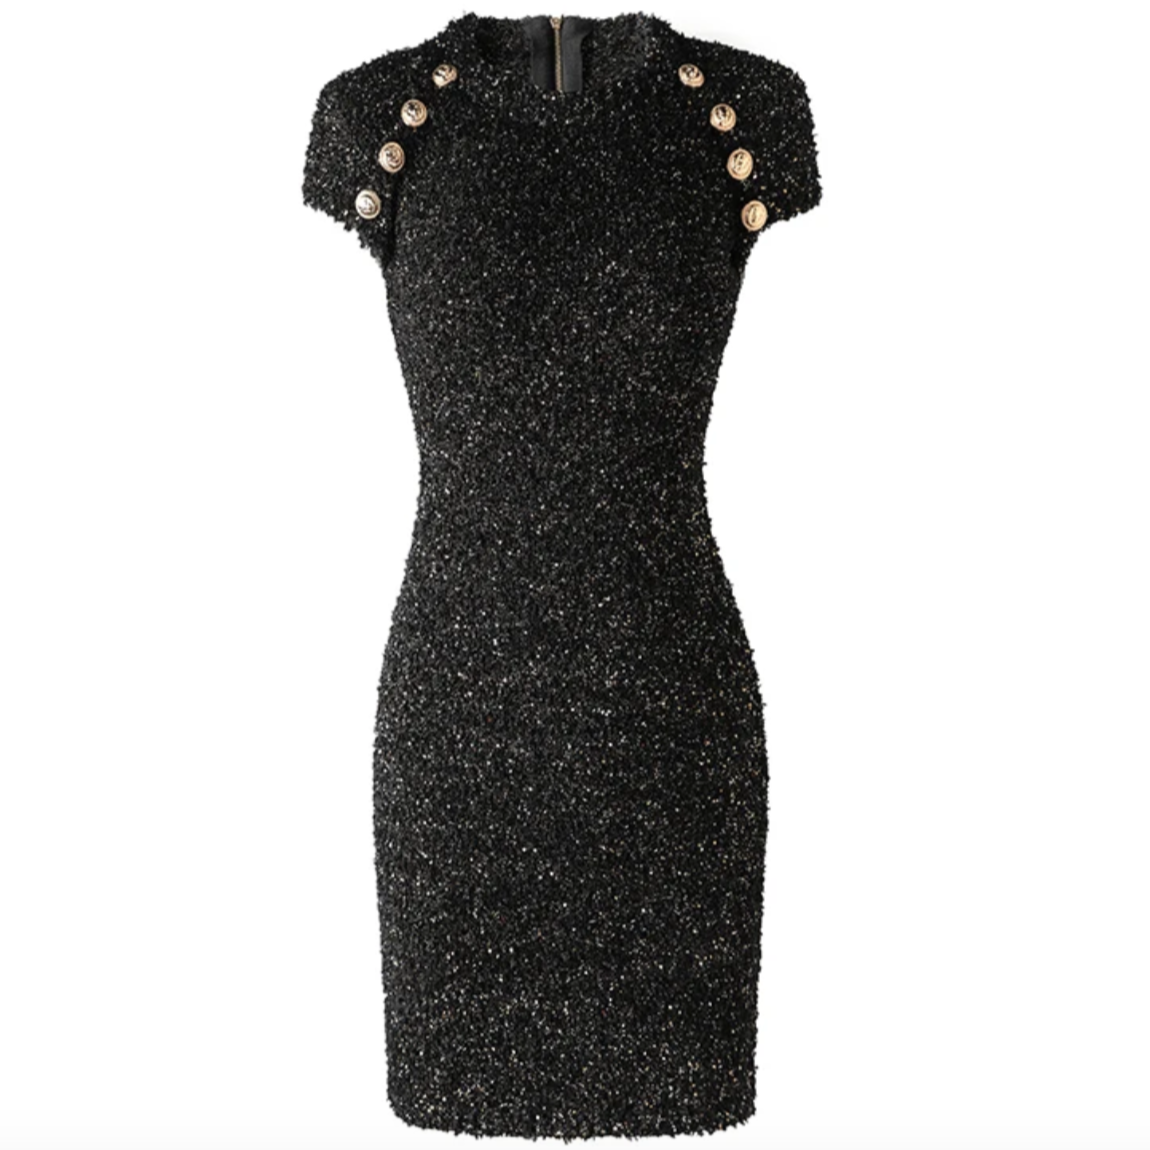 The Natalynska Angellina dress is a stunning short sleeve, mini dress with gold button details and boucle, clustered fabric with glittery threads. balmain inspired